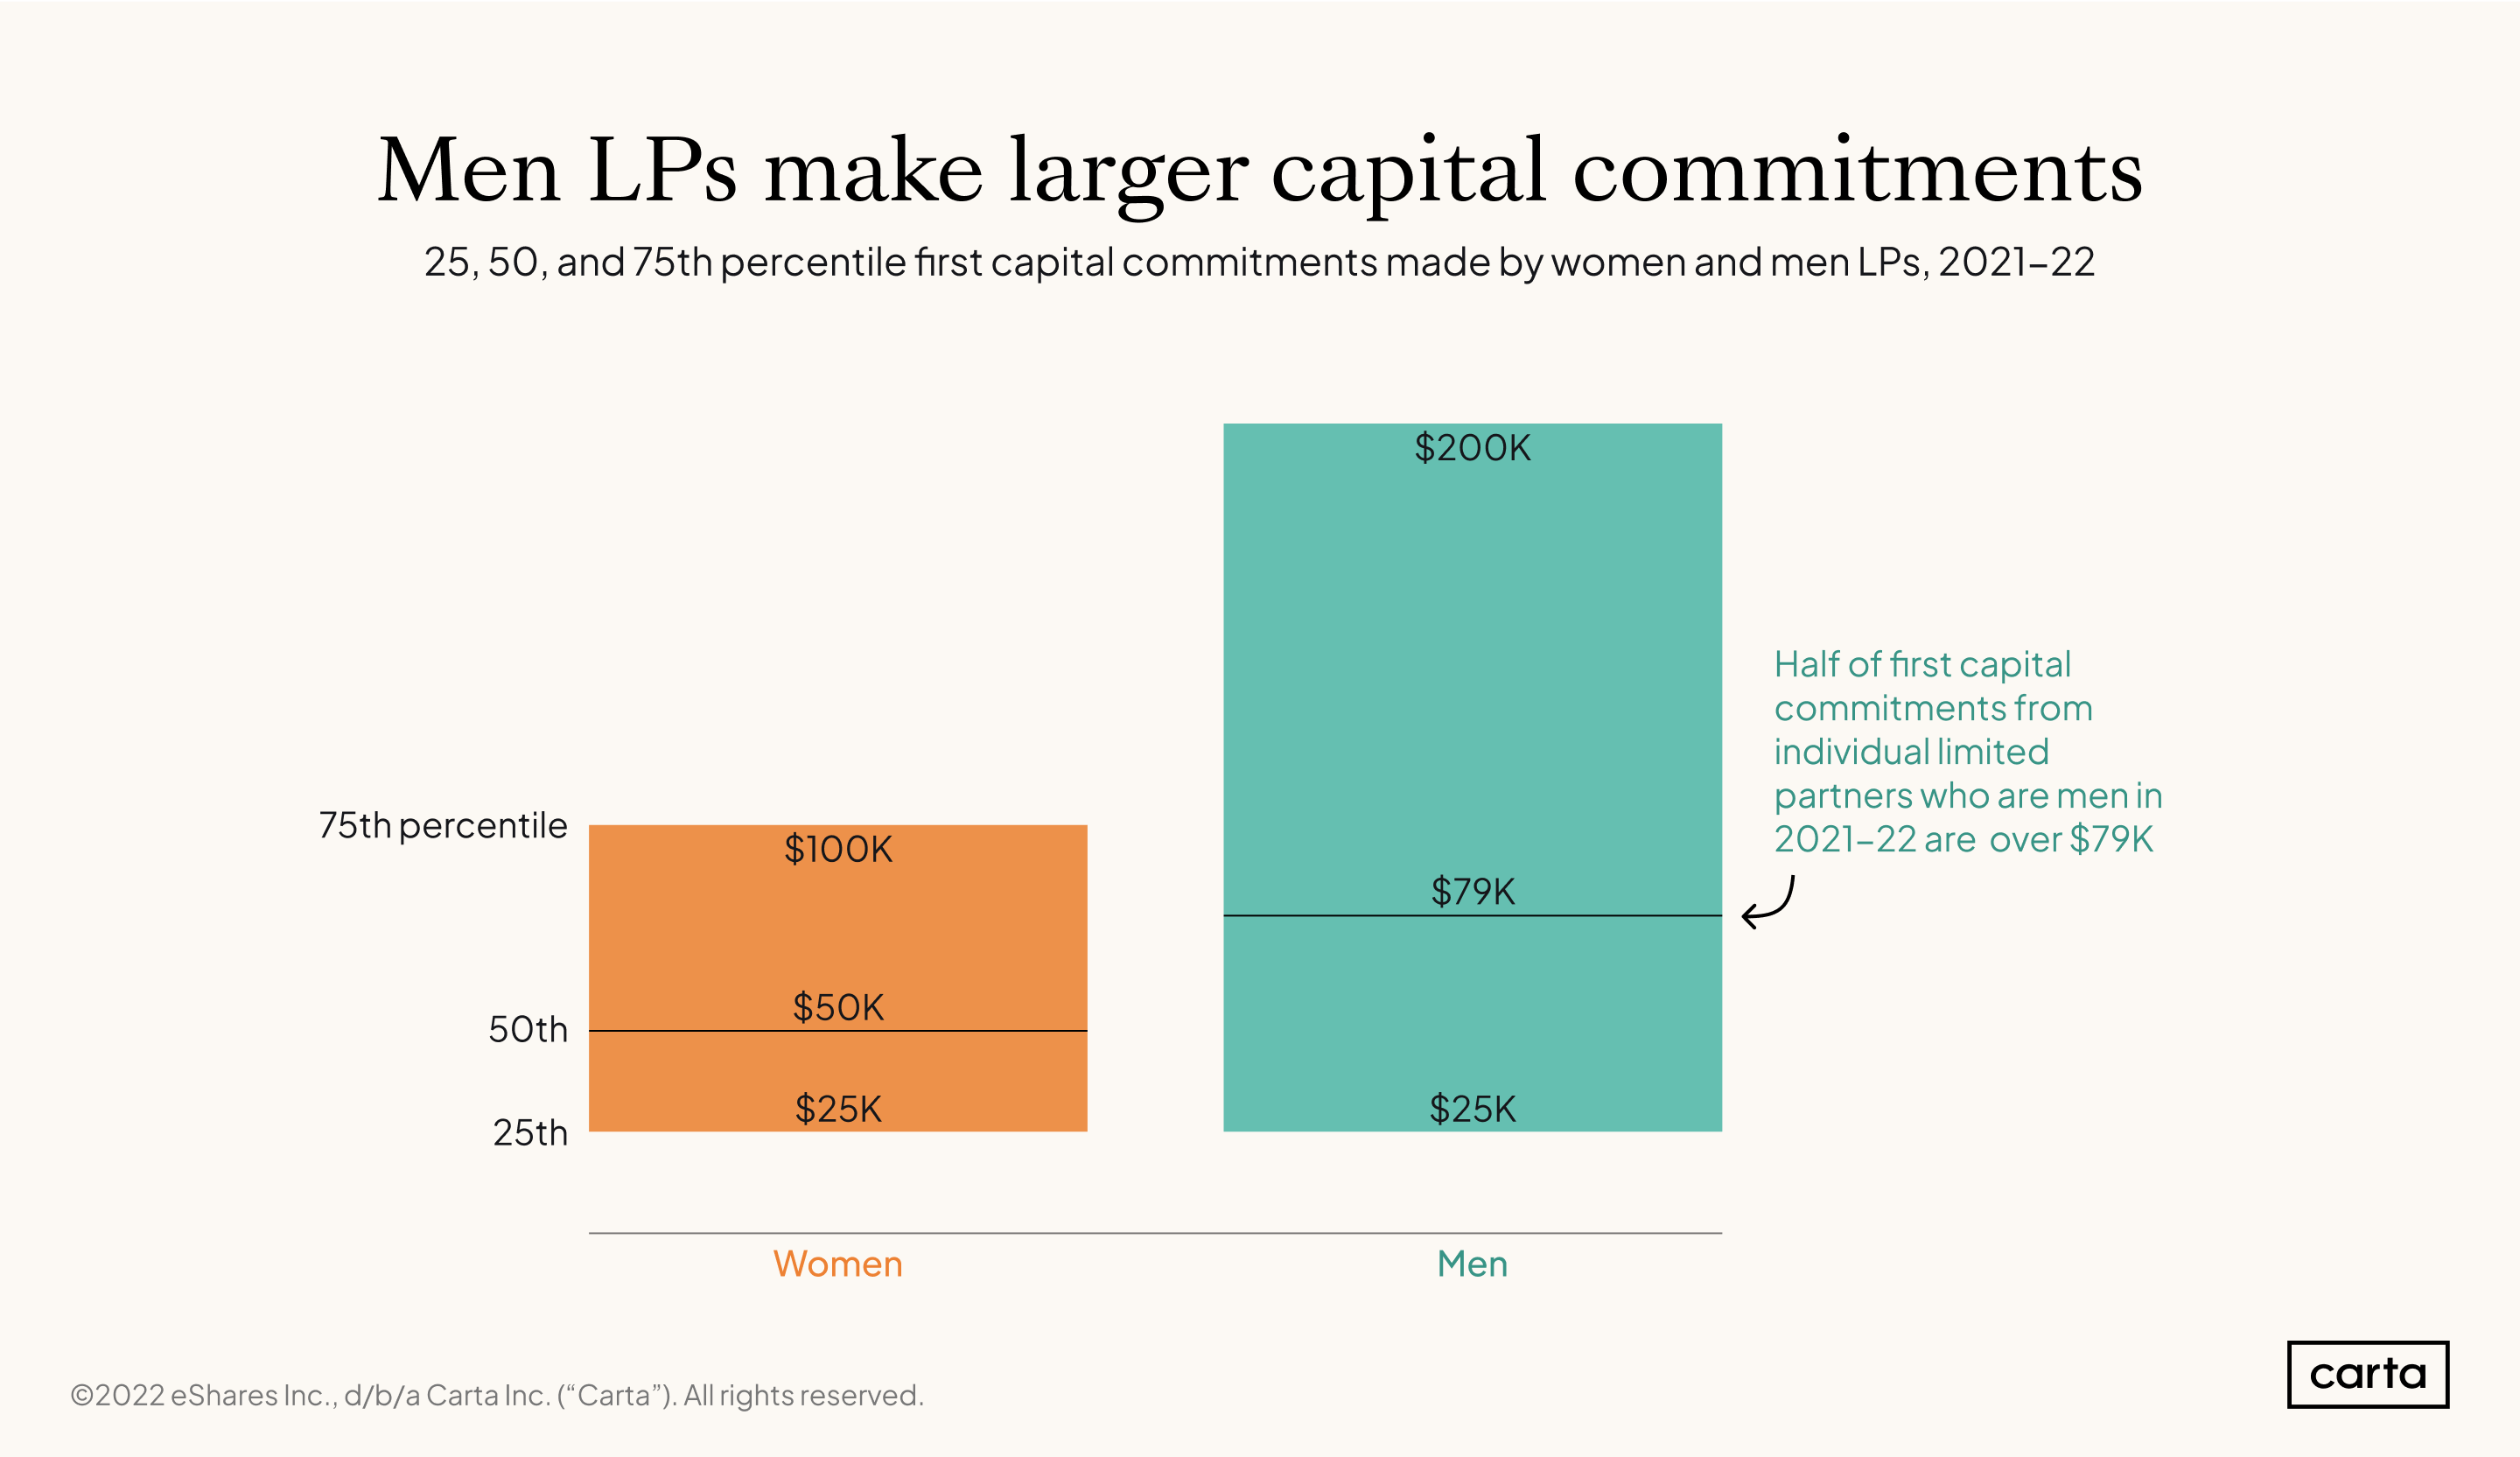 CES Size of capital commitments by LP gender